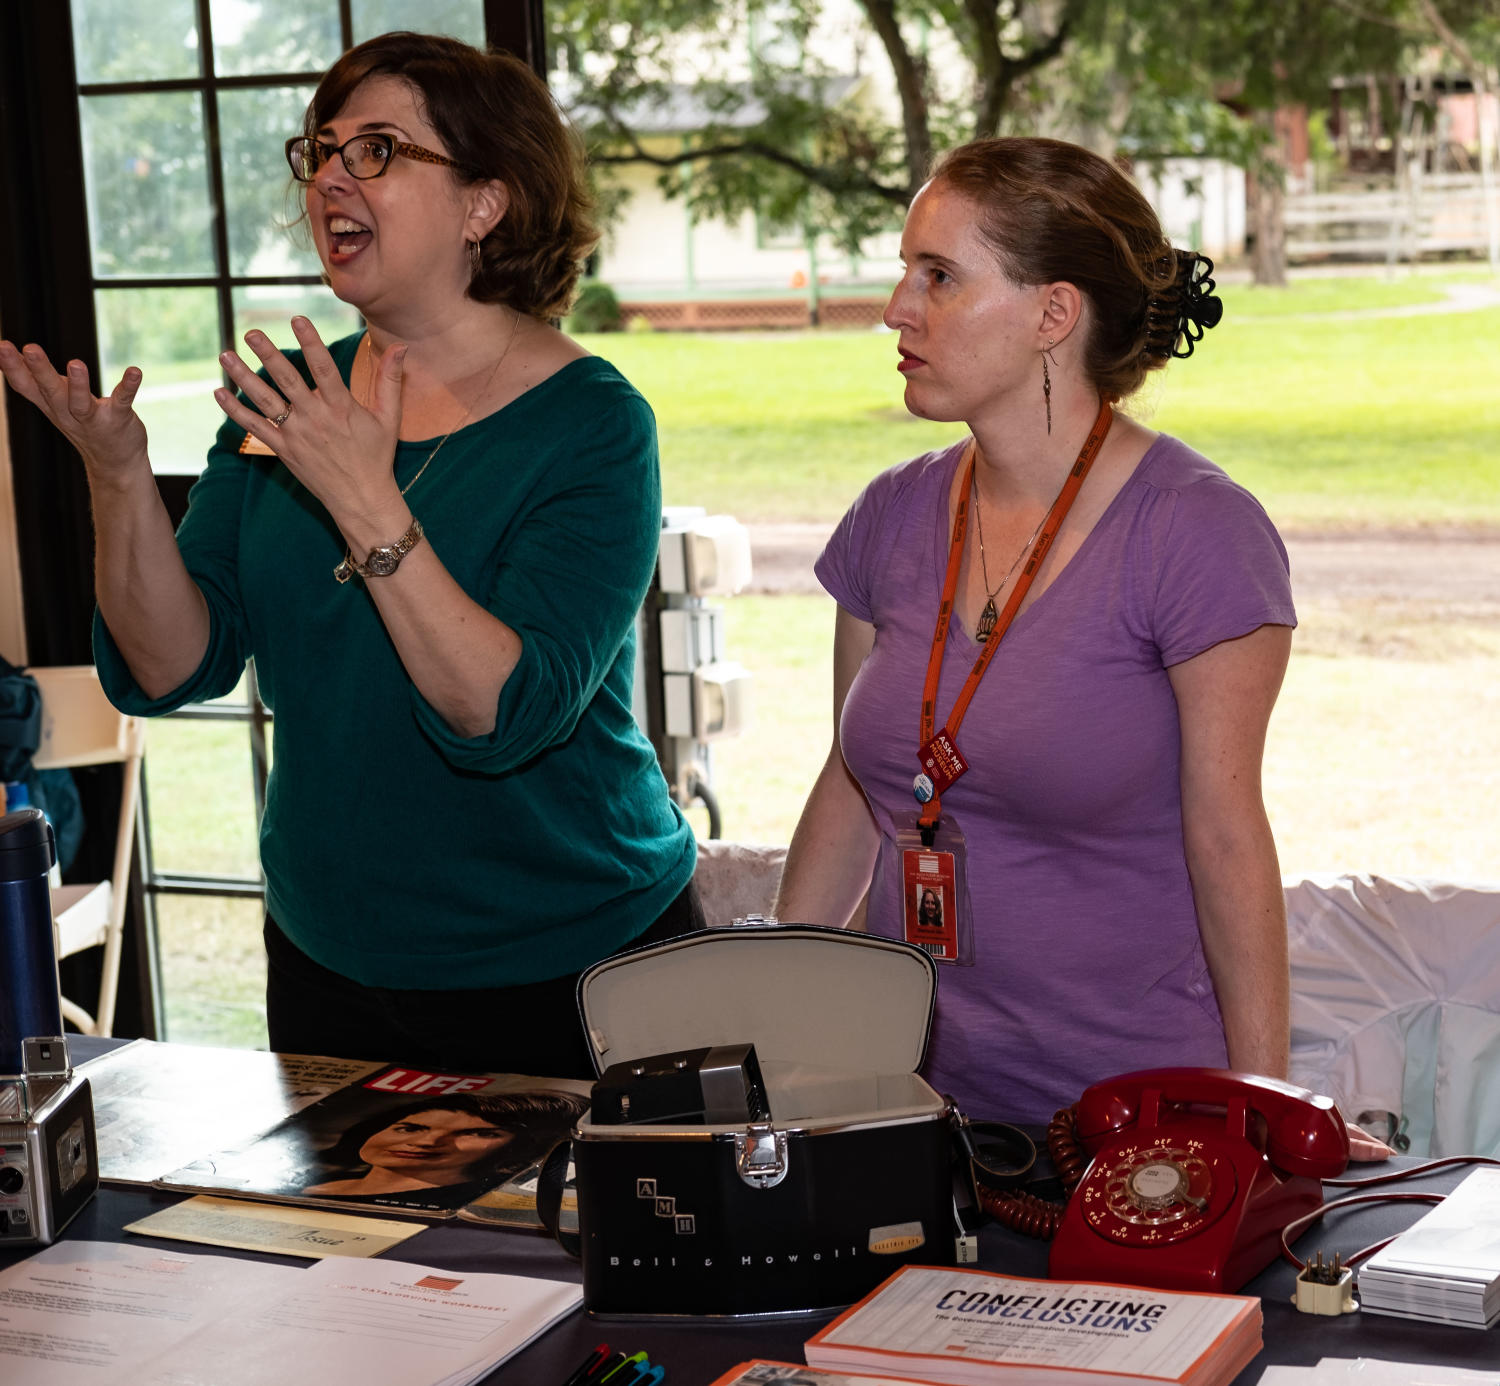 [Sixth Floor Museum booth], Photograph of the Sixth Floor Museum booth table at the DFW Archives Bazaar event inside of the Dallas Heritage Village pavilion. Curator Lindsey Richardson (green), and the Collection and Exhibits Manager, Stephanie Allen-Givens (purple), are behind the table and Richardson appears to be speaking to a visitor. There is a purse, telephone, LIFE Magazine, and several paper handouts on the table to look at., 